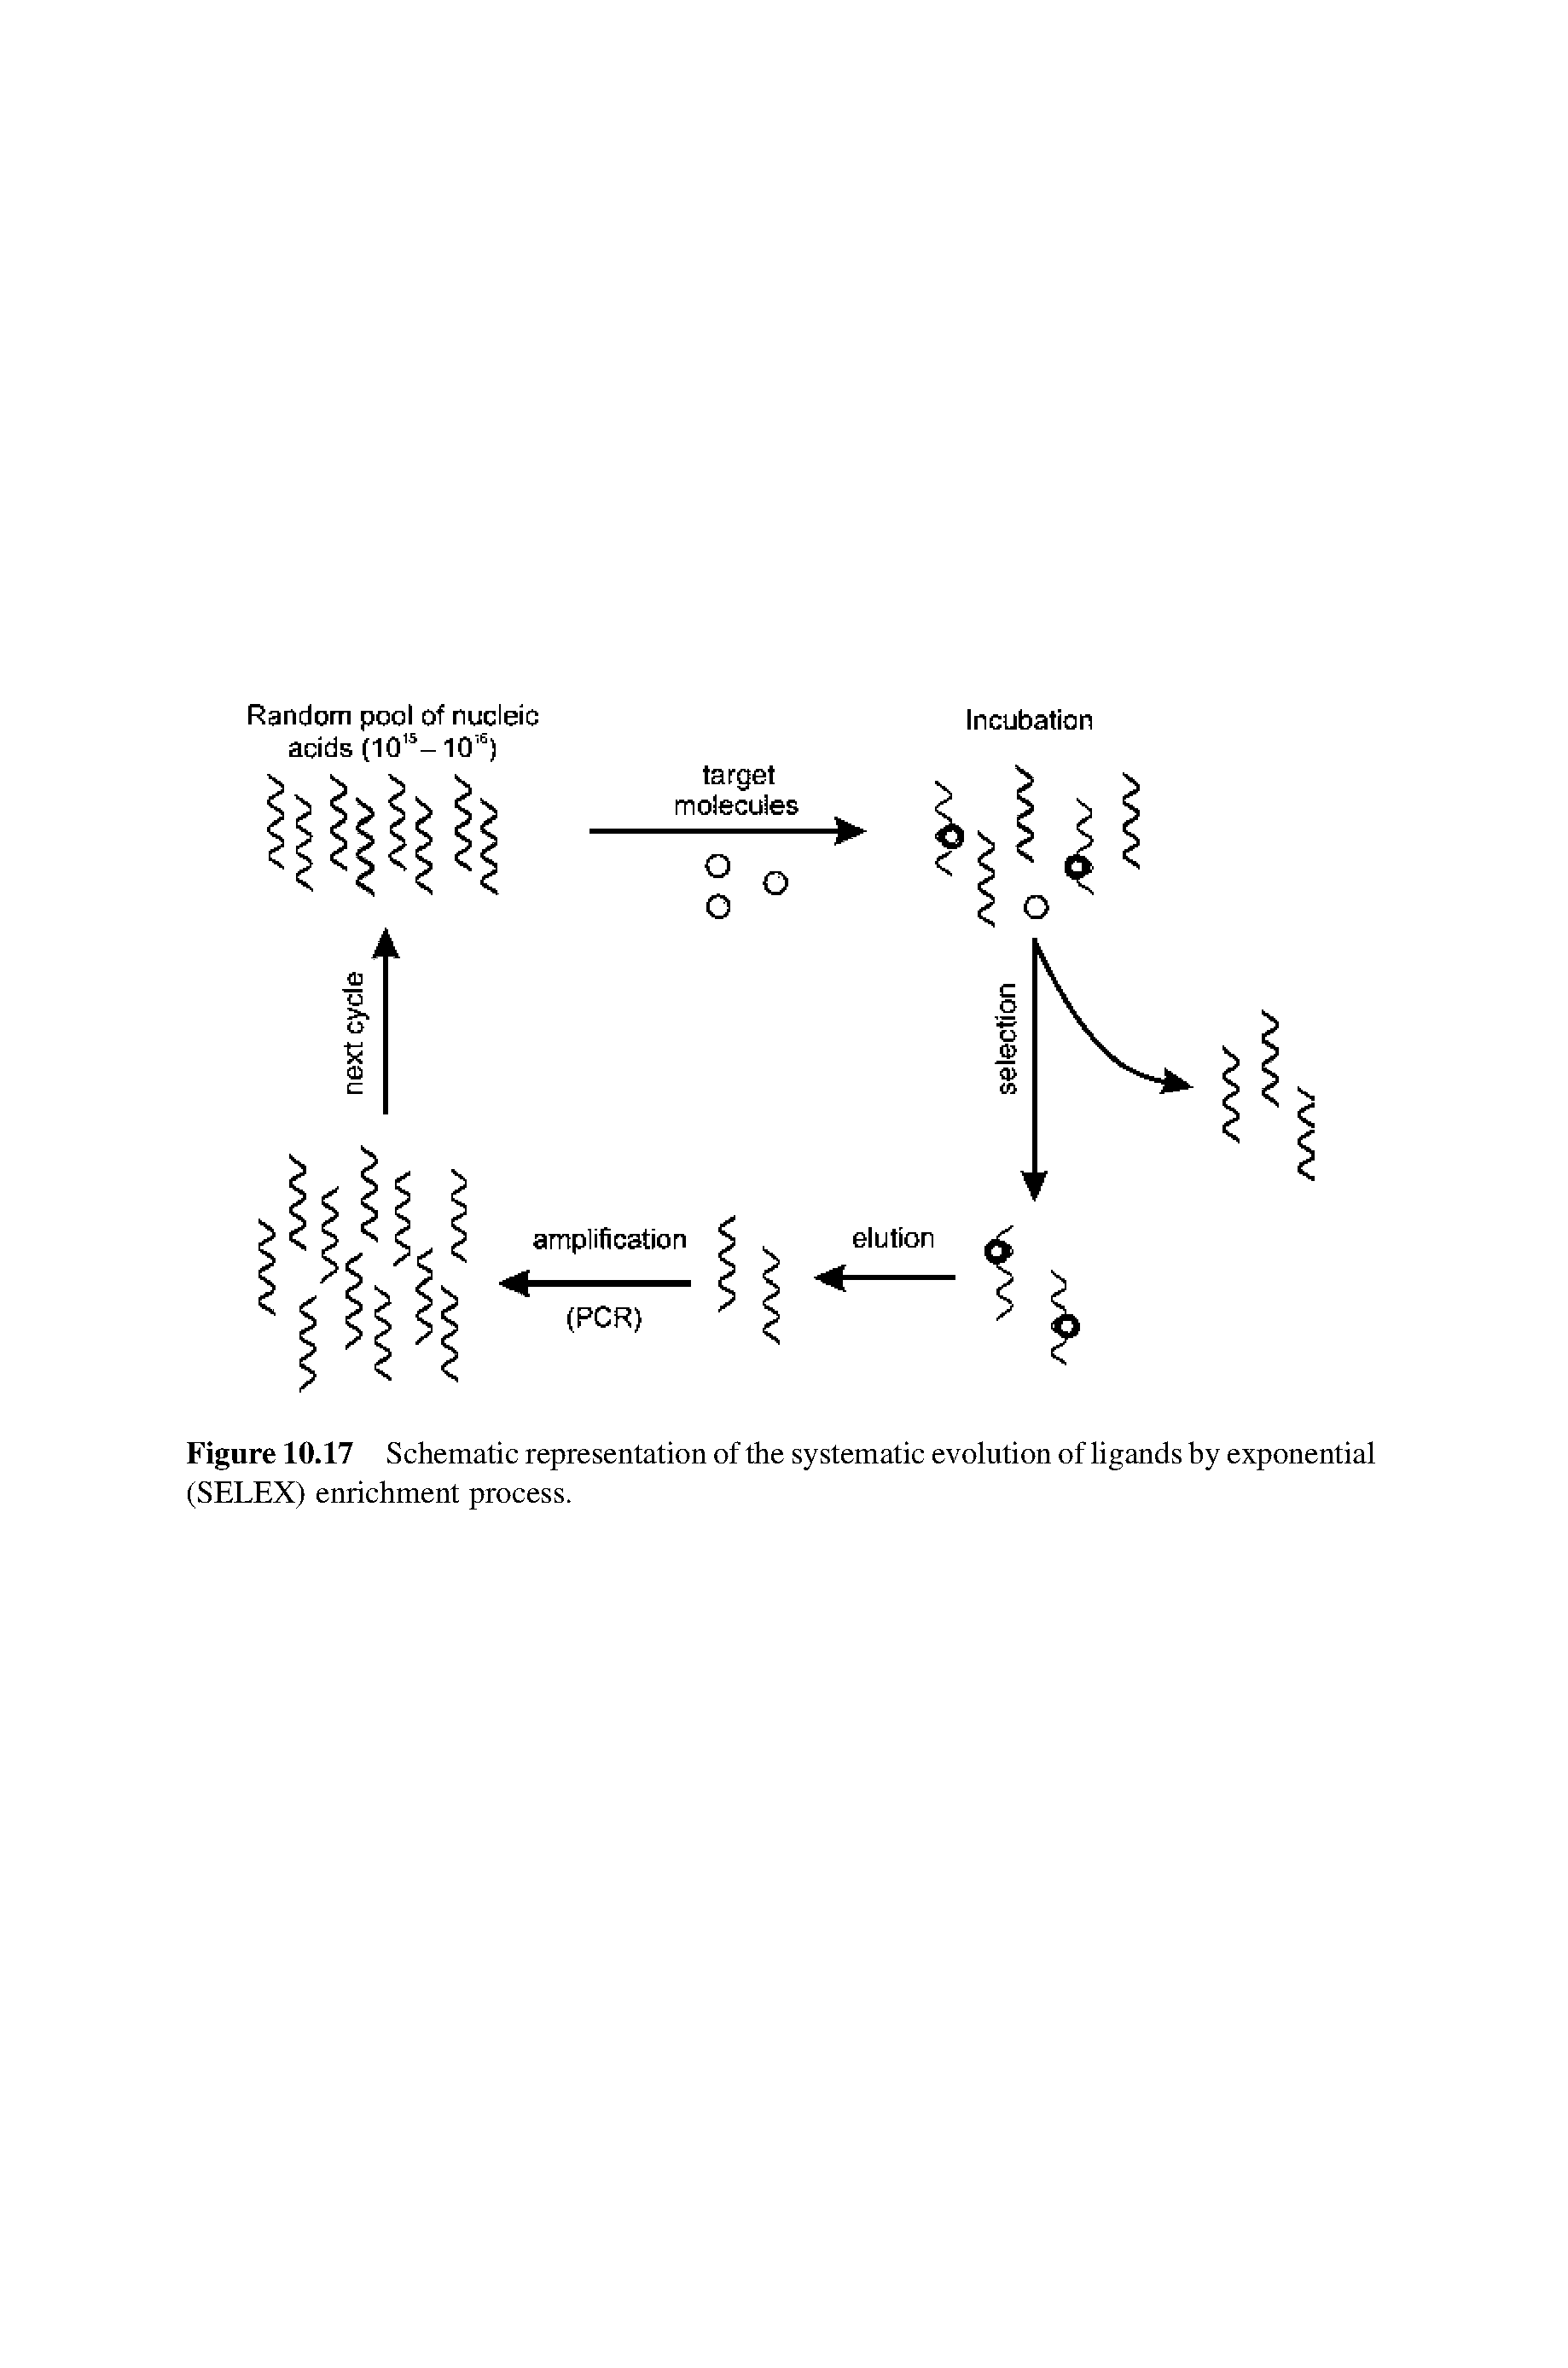 Figure 10.17 Schematic representation of the systematic evolution of ligands by exponential (SELEX) enrichment process.